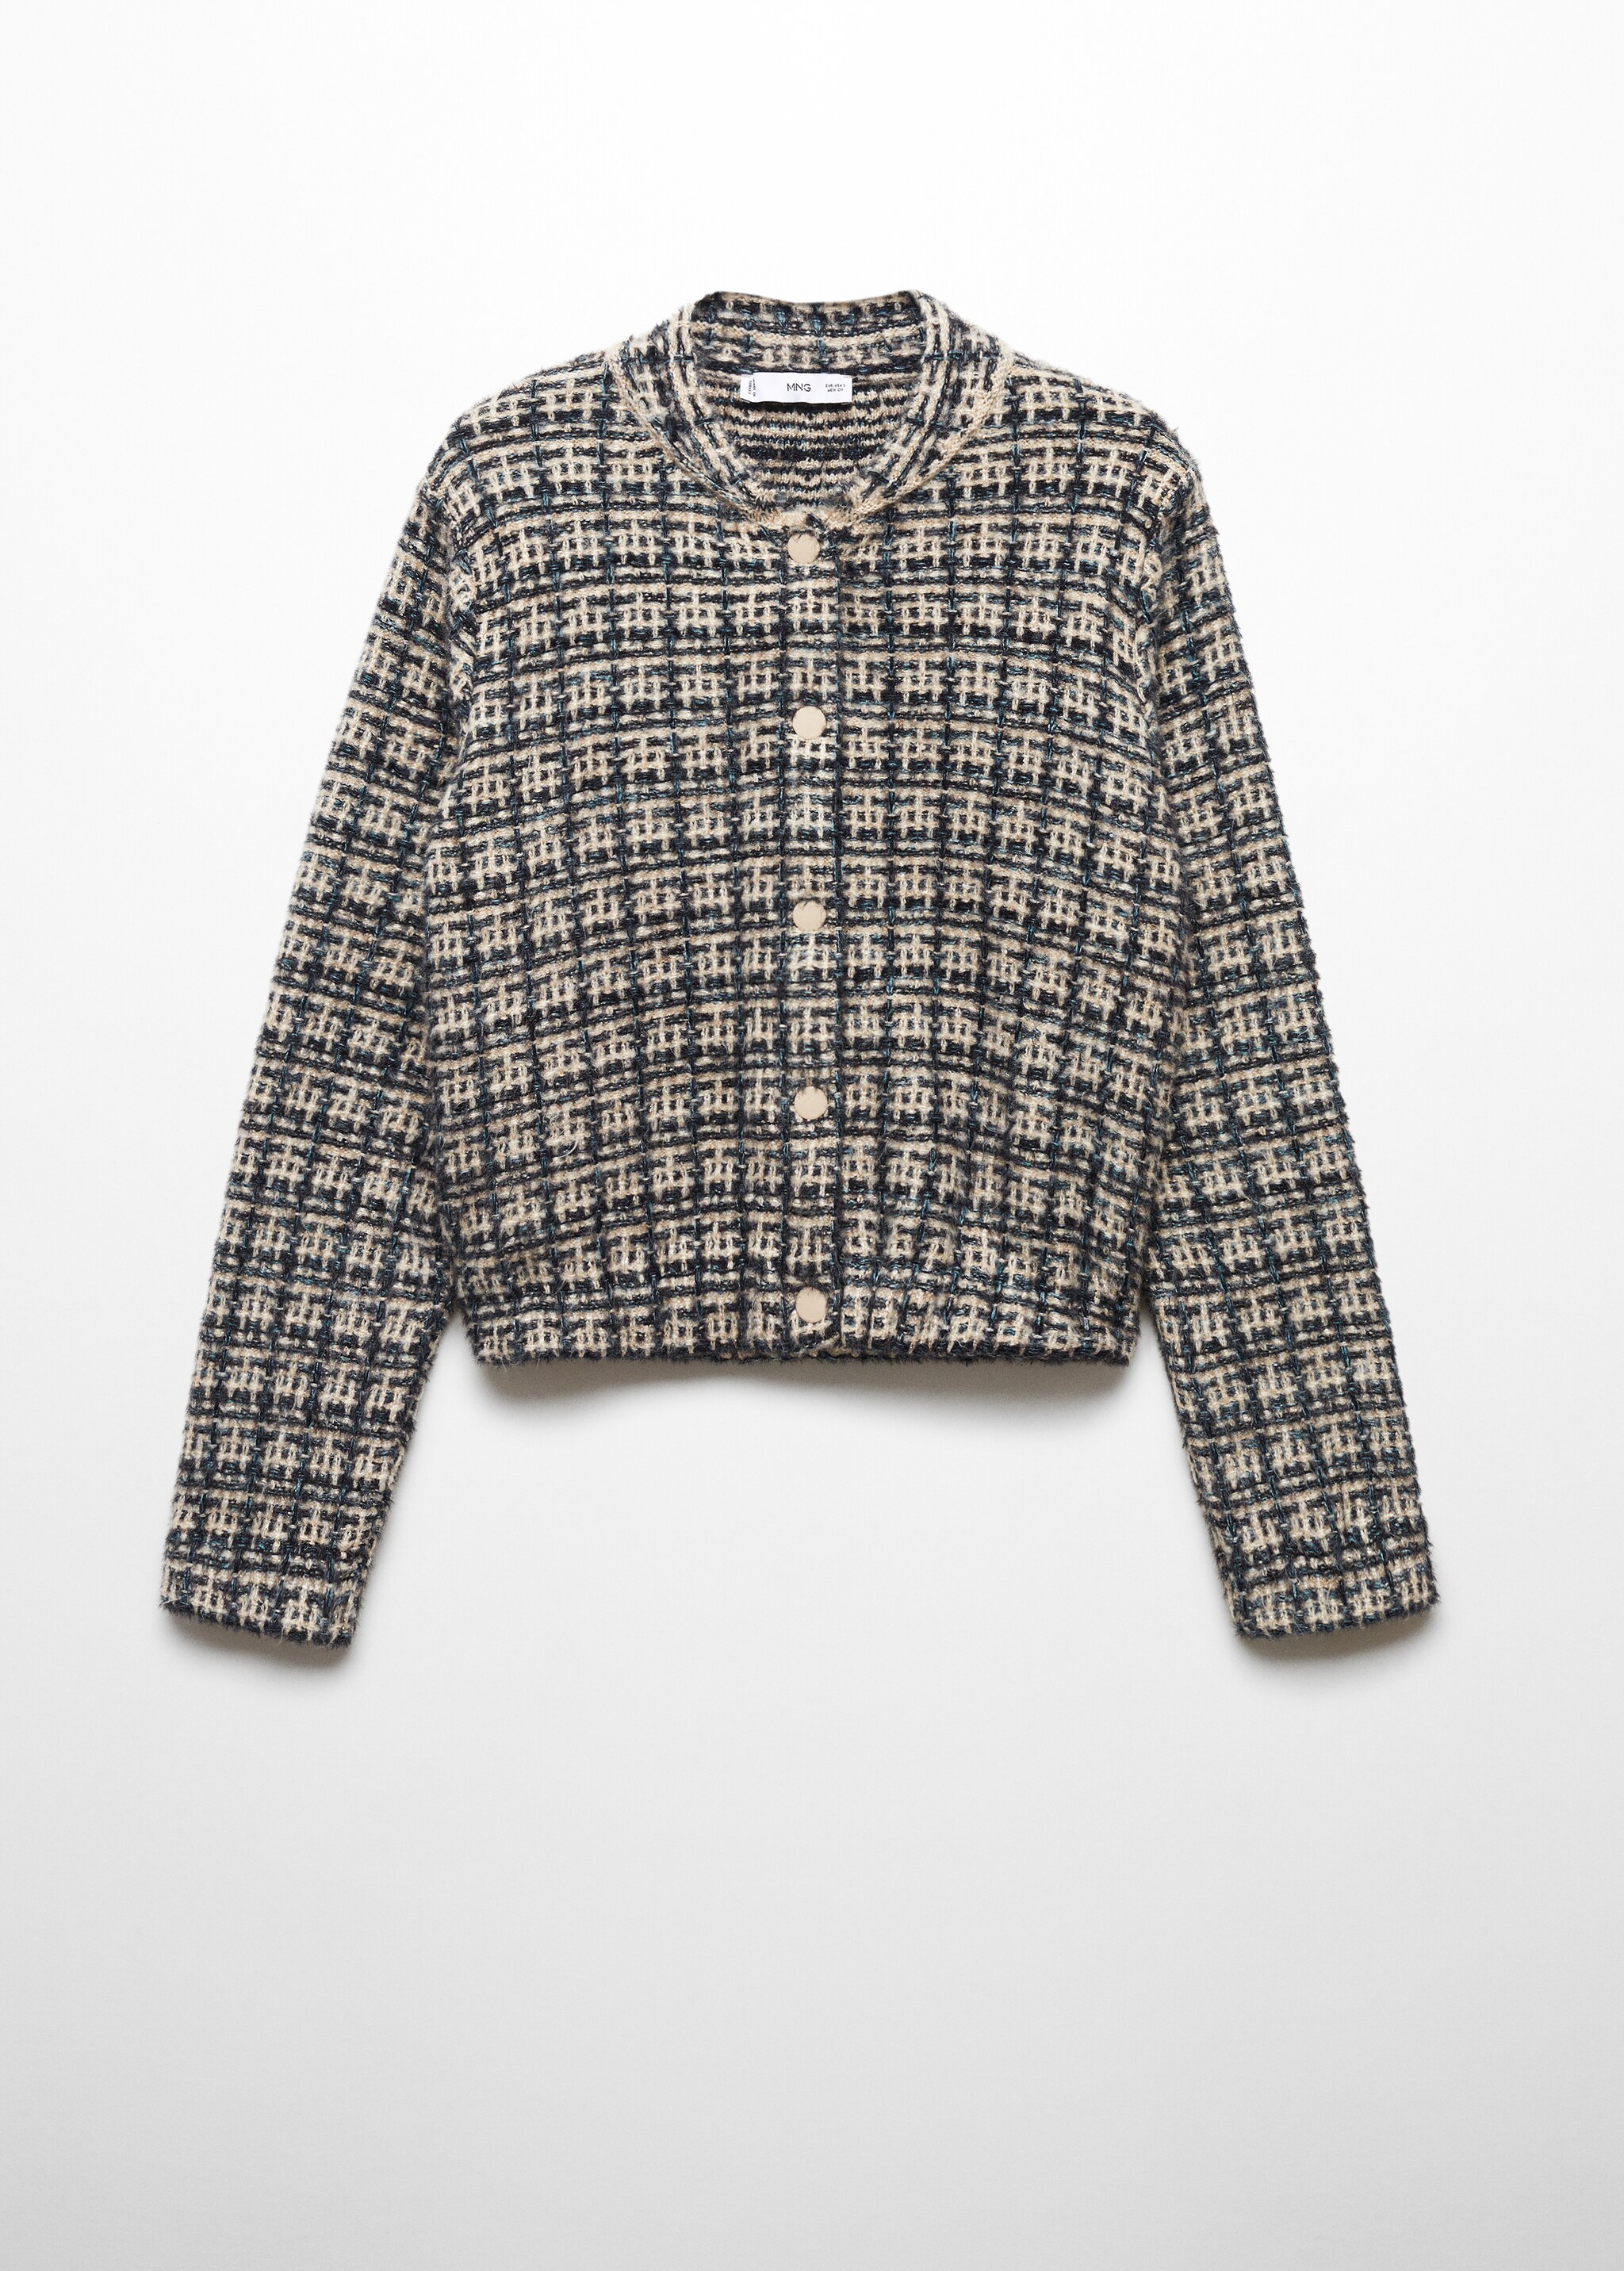 Tweed bomber jacket - Article without model